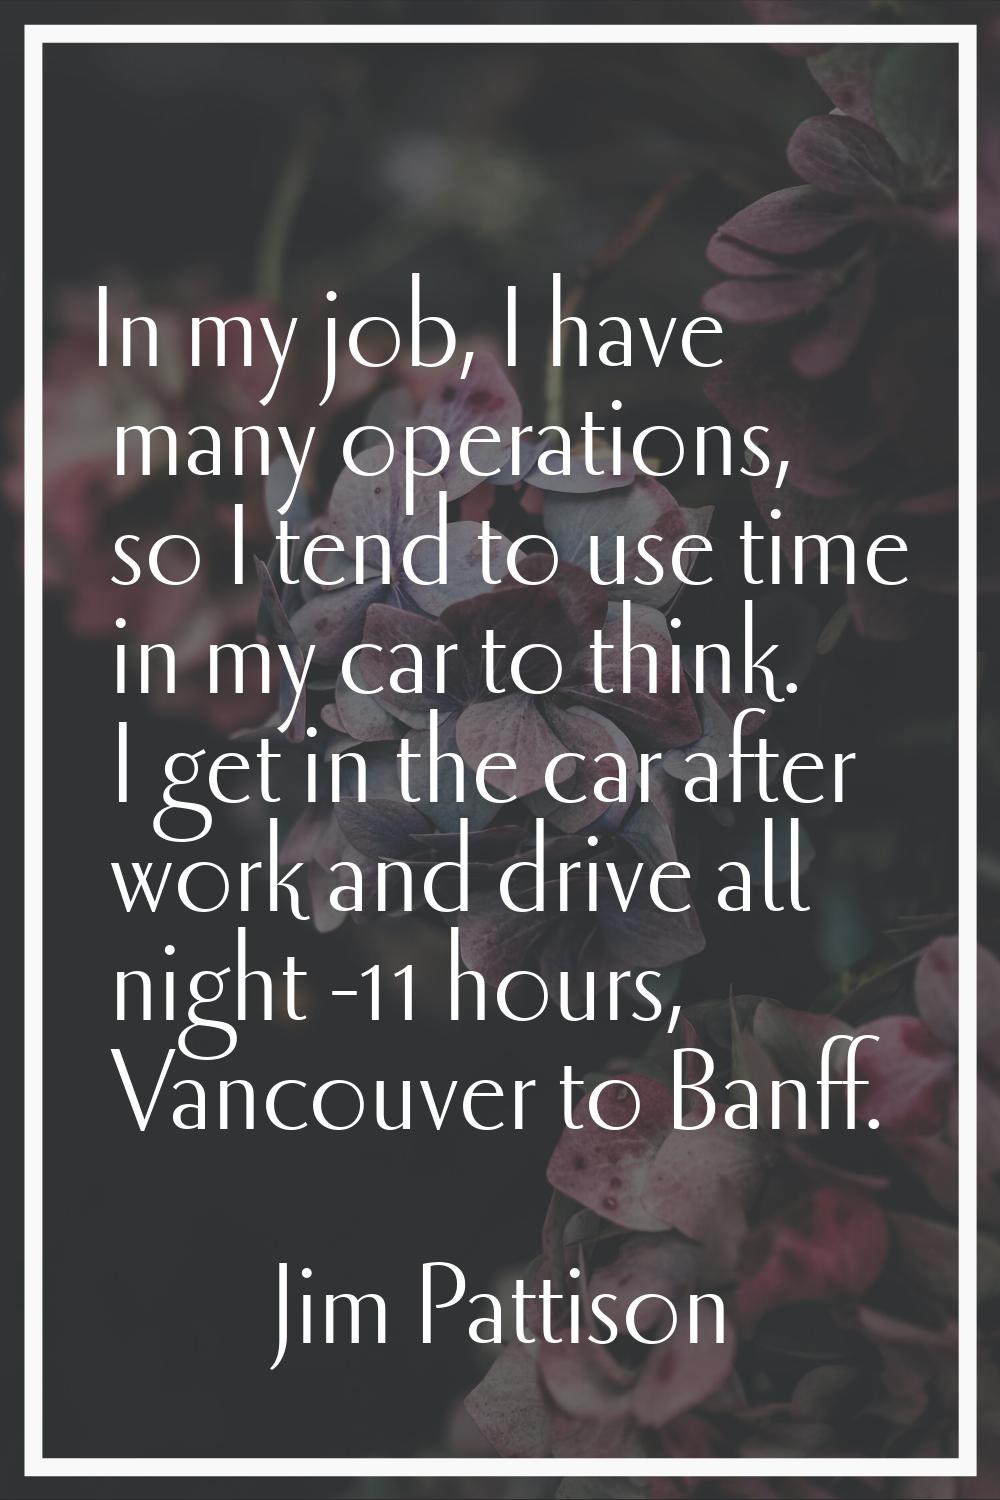 In my job, I have many operations, so I tend to use time in my car to think. I get in the car after